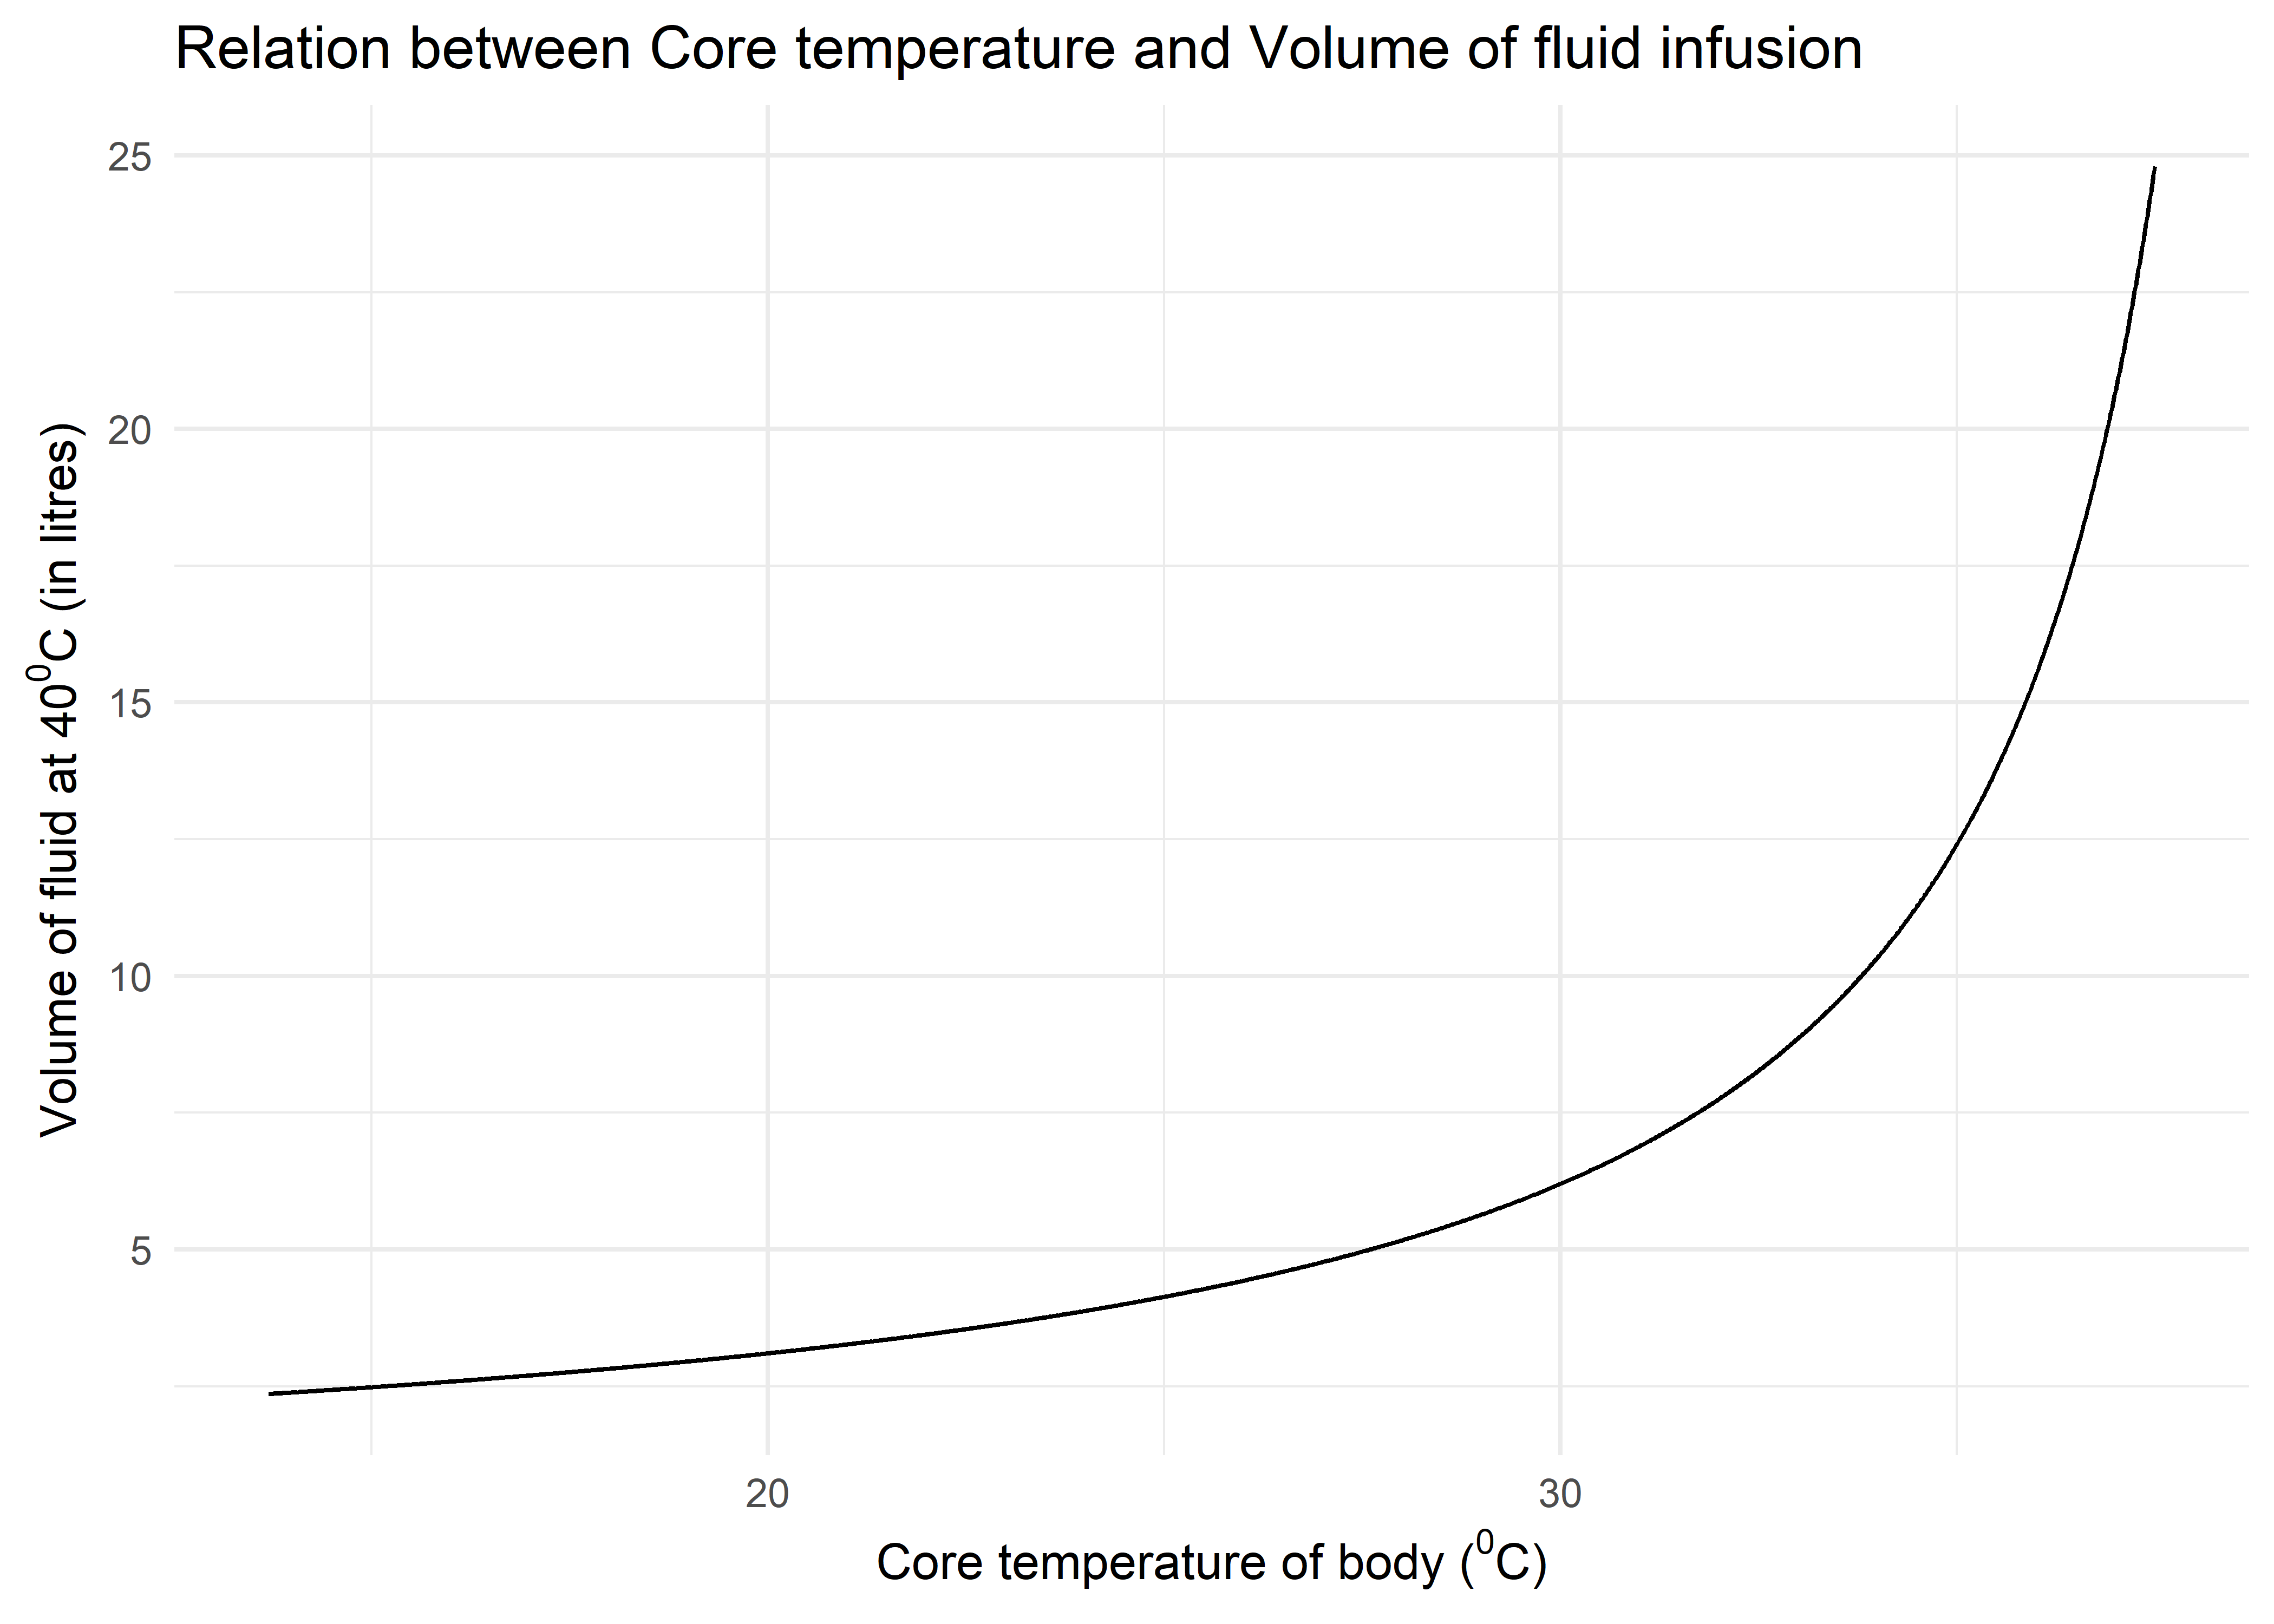 Graph showing amount of fluid (in litres) required to raise temperature by 1^0^C within physiological temperature range